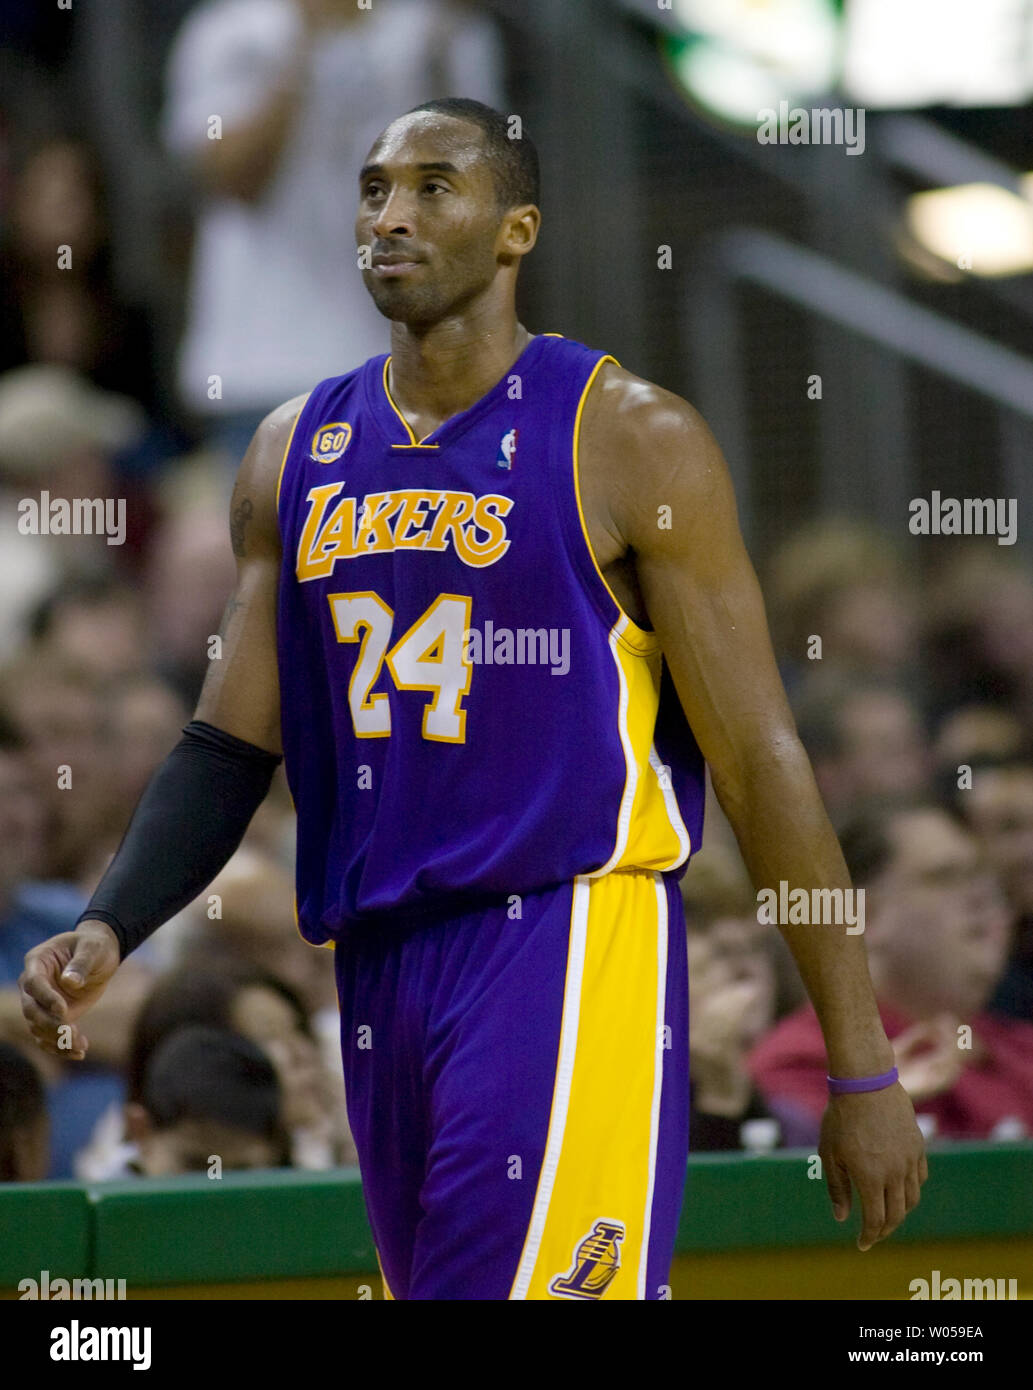 L.A. Lakers' Kobe Bryant walks off the court at the end of their 123-121 overtime win over the Seattle SuperSonics at the Key Arena in Seattle on January 14, 2008. Bryant scored 48 points in the win. (UPI Photo/Jim Bryant). Stock Photo